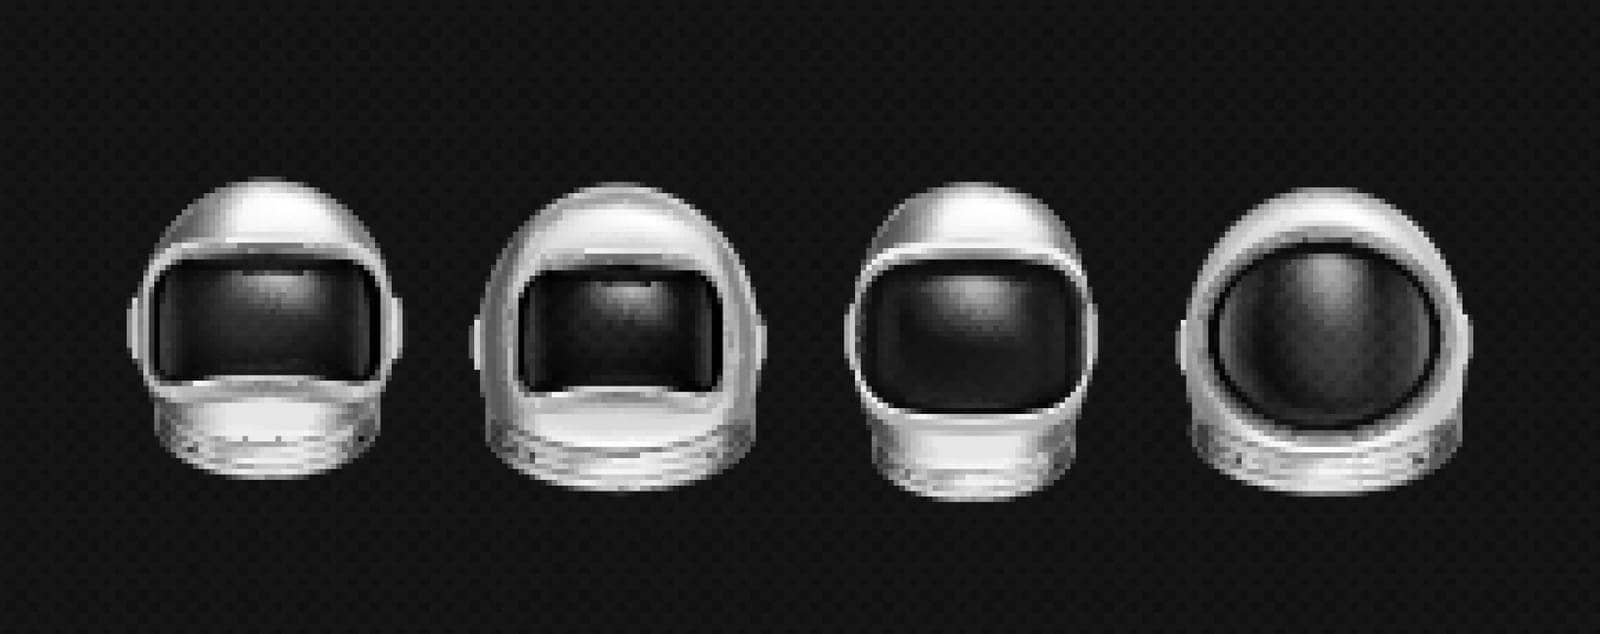 Astronaut helmets, cosmonaut mask with clear glass for space exploration and flight in cosmos. Vector realistic set of white suit part for protection spaceman head isolated on transparent background